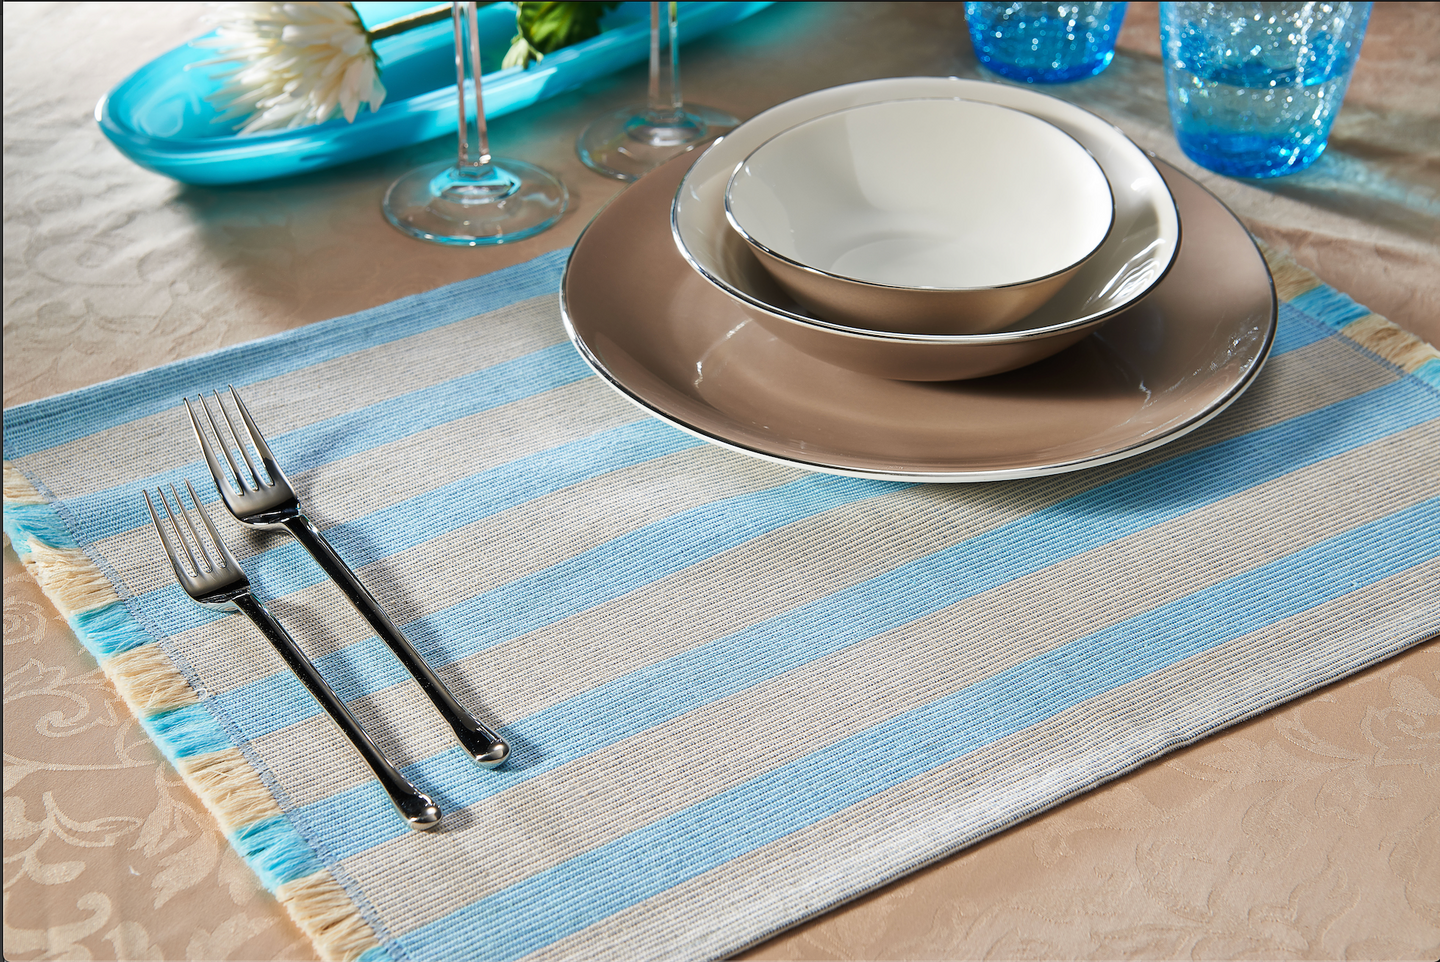 Pair of Beige & Baby Blue Striped Placemats